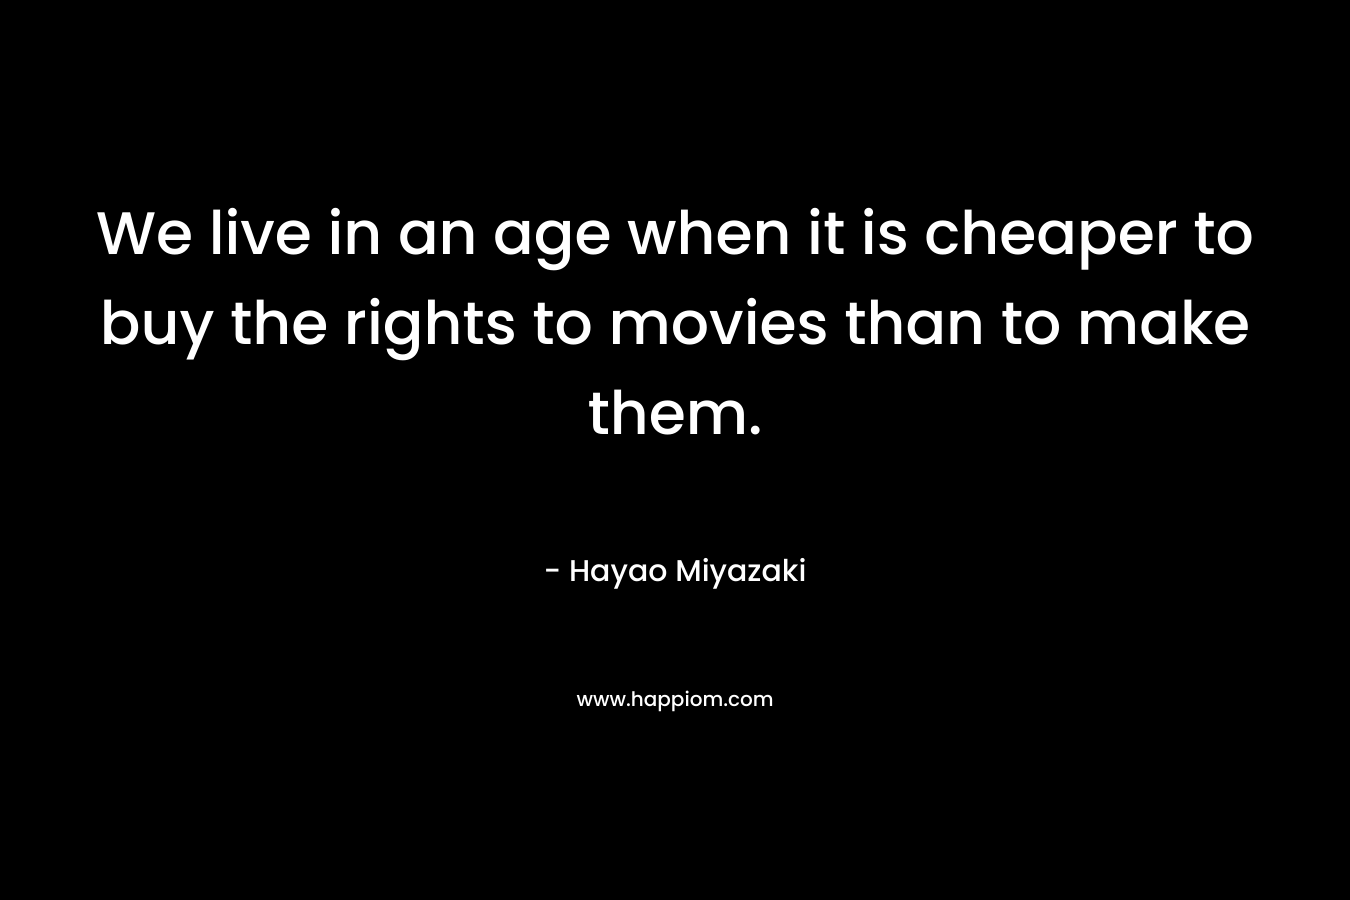 We live in an age when it is cheaper to buy the rights to movies than to make them. – Hayao Miyazaki